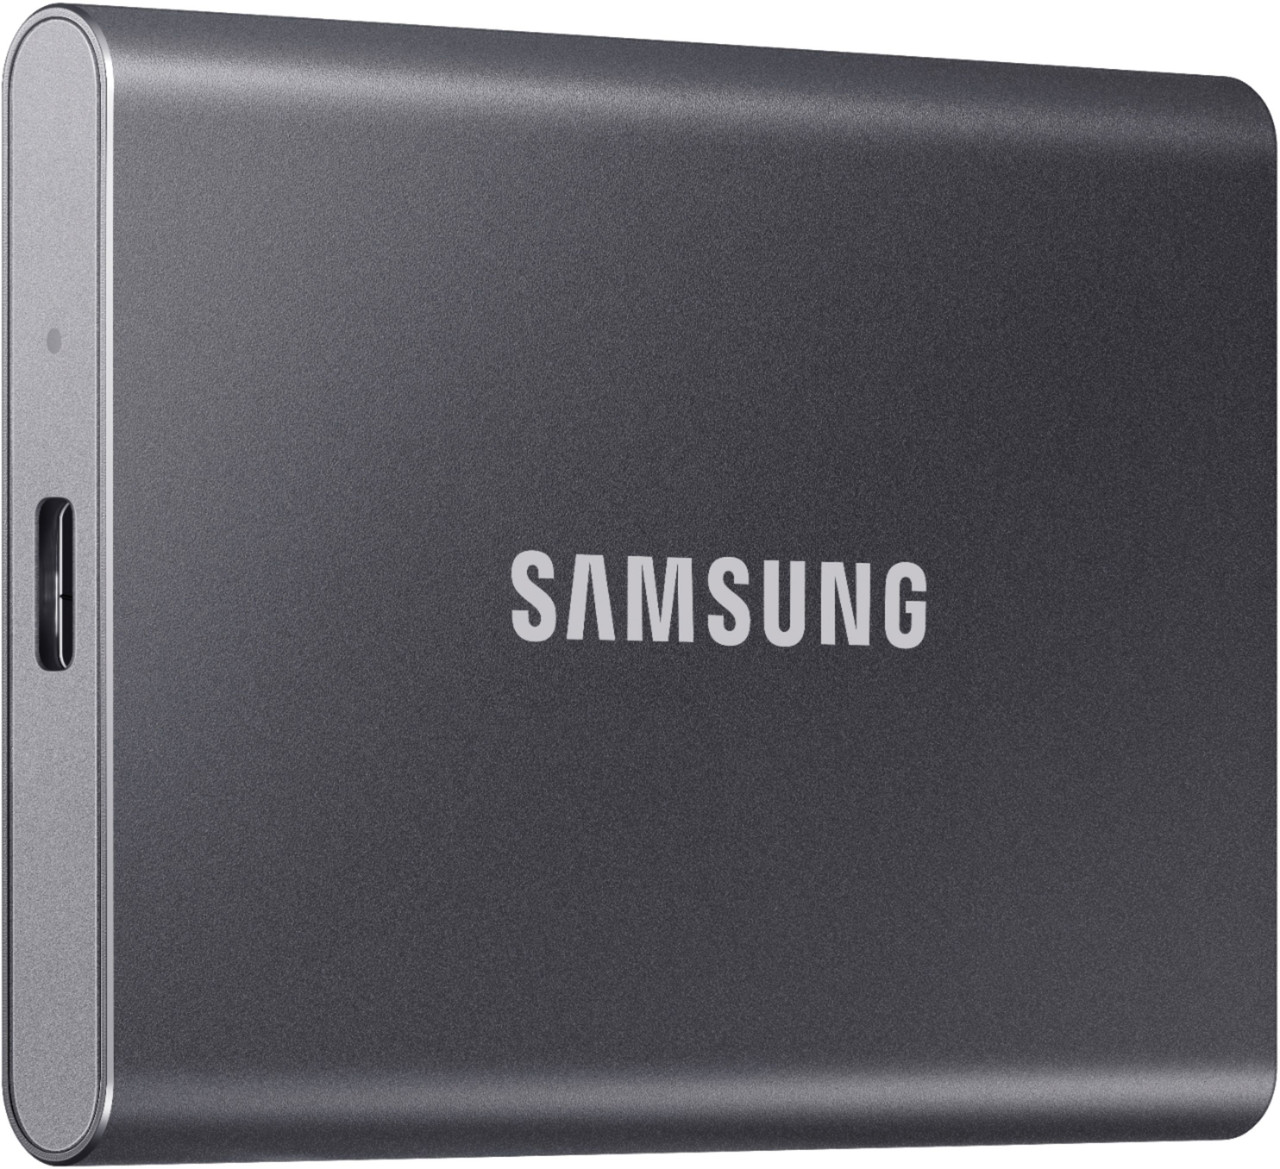 Samsung - Geek Squad Certified Refurbished T7 2TB External USB 3.2 Gen 2 Portable Solid State Drive with Hardware Encryption - Titan Gray